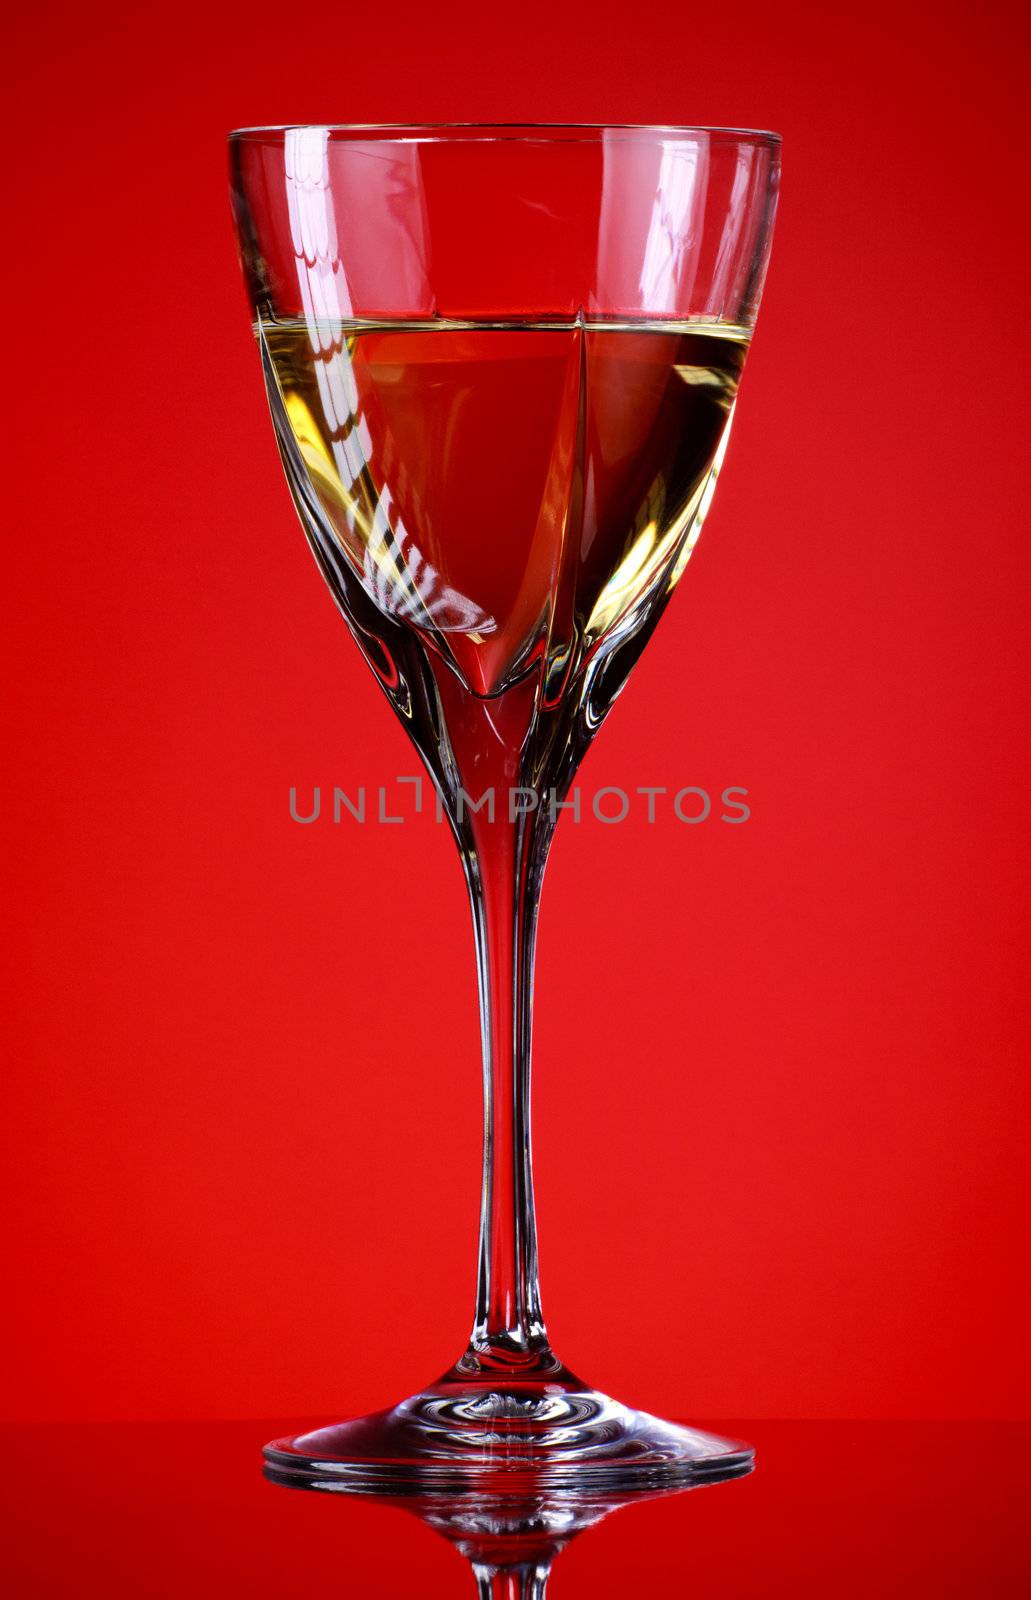  glass of white wine, red background